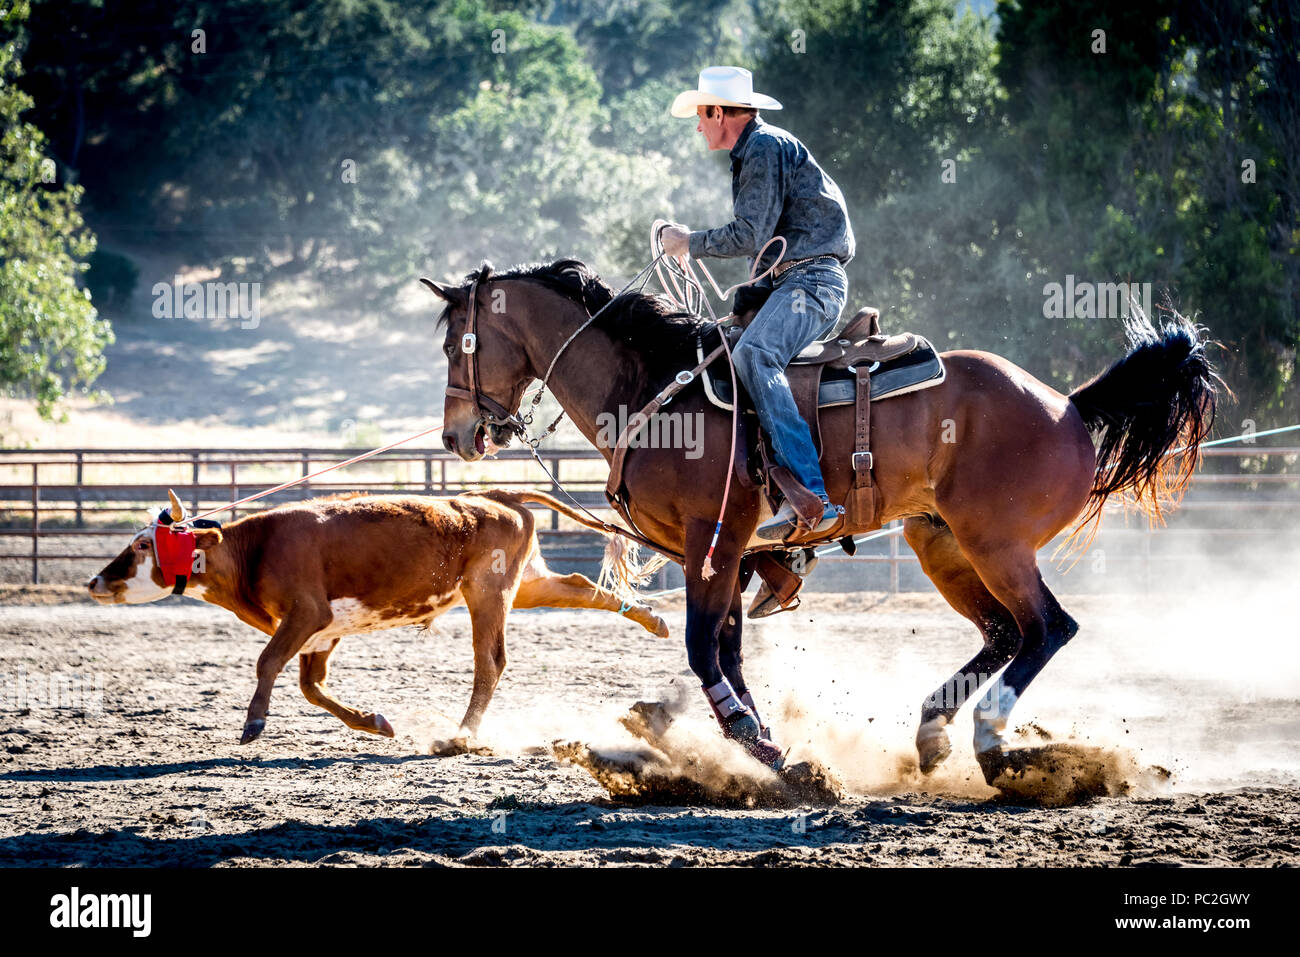 A real life cowboy wrangler with lasso roping young steer in a rodeo, on horseback with cowboy hat in action shot, dust and sun. Stock Photo